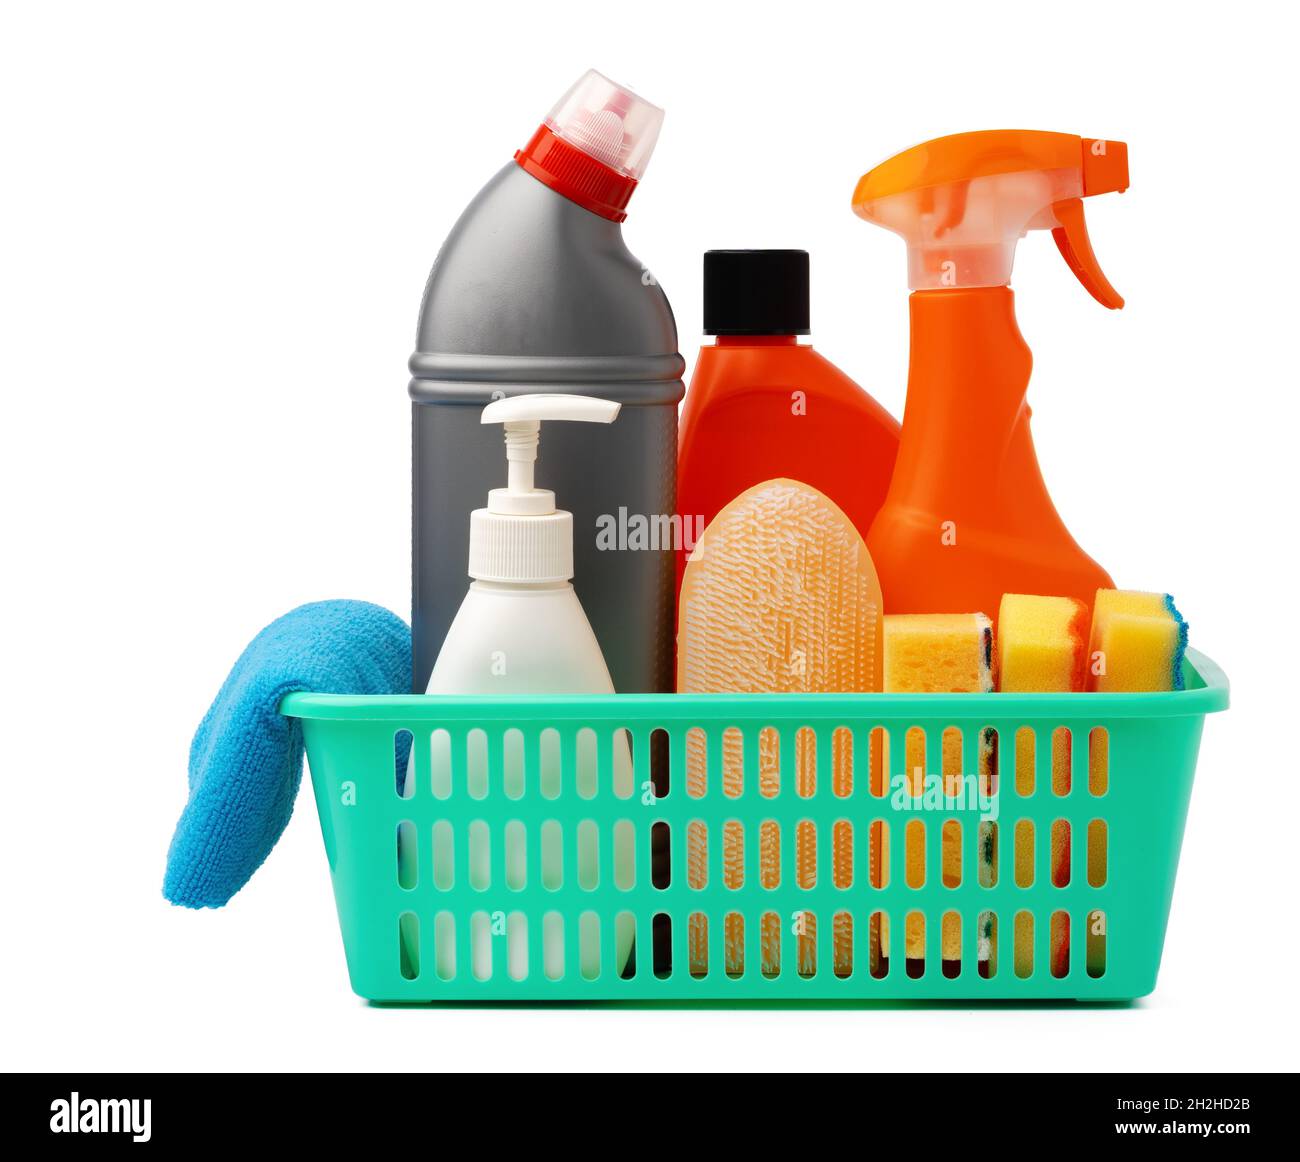 15,919 Plastic Household Items Images, Stock Photos, 3D objects